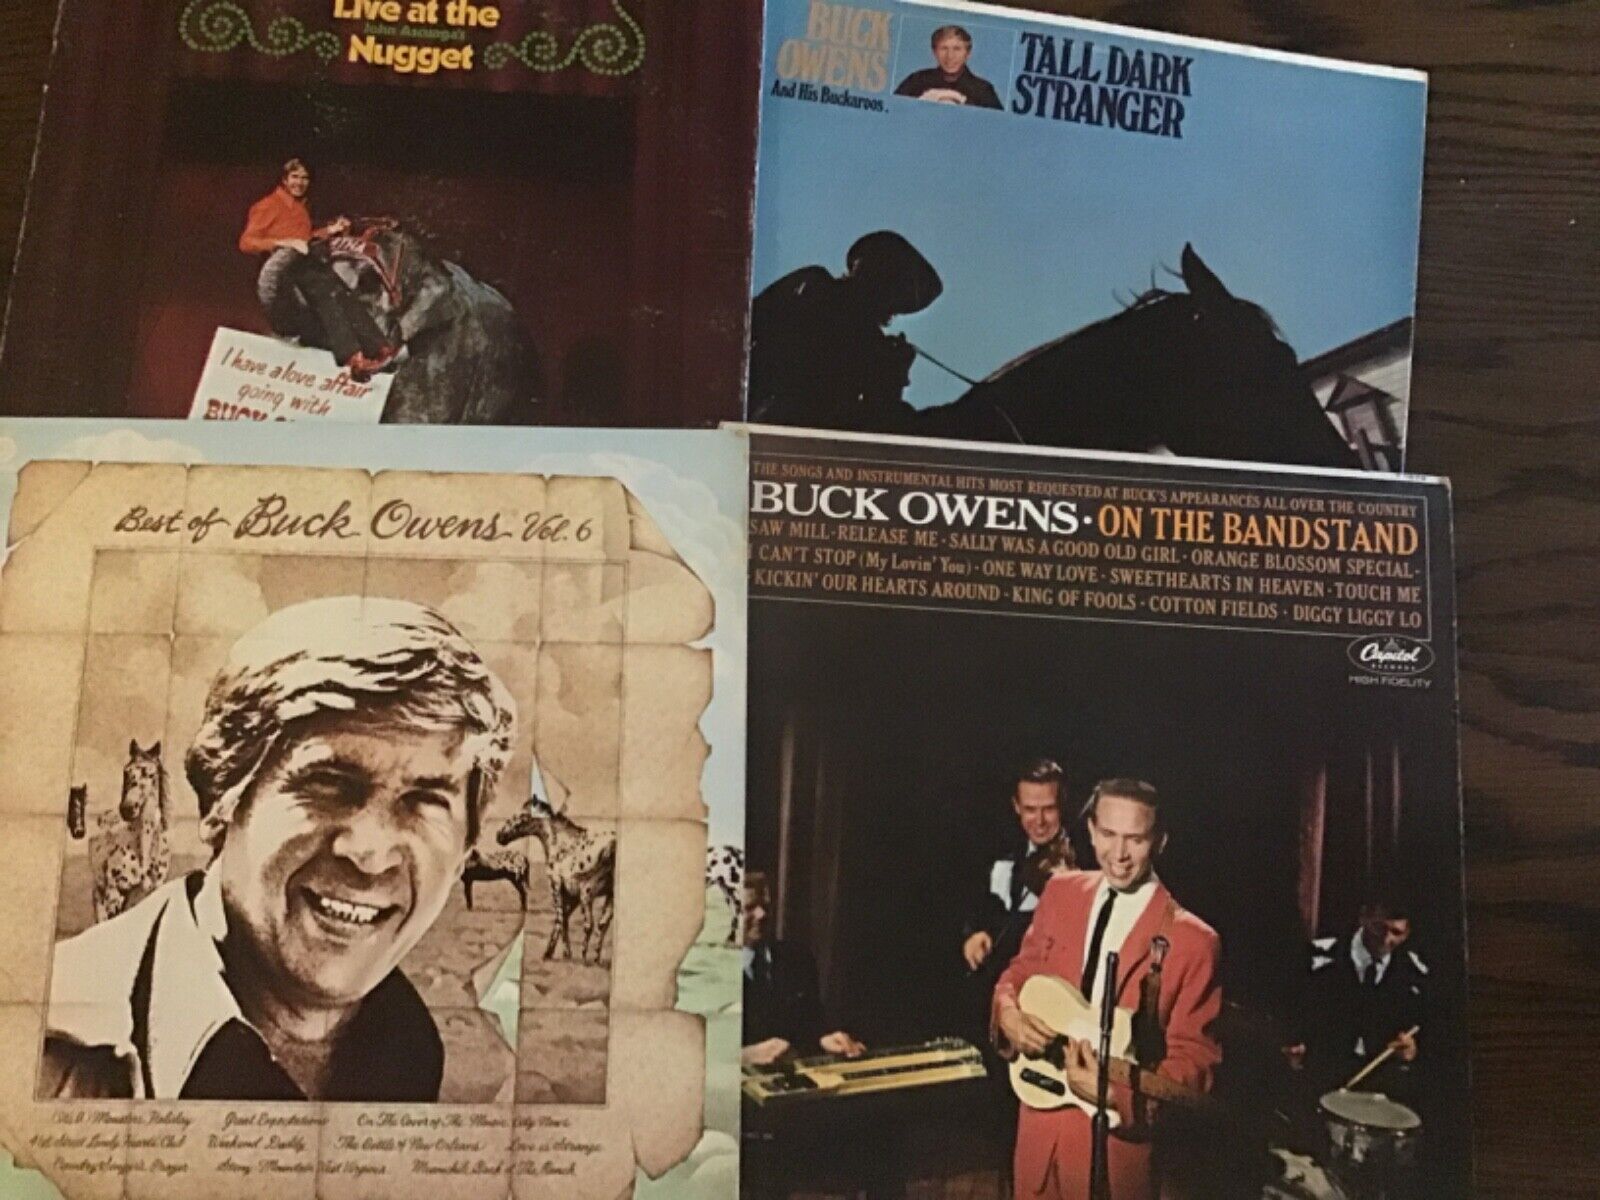 BUCK OWENS ORIGINAL VINYL LPS VG OR BETTER LIVE AT THE NUGGET/VOL. 6 +2